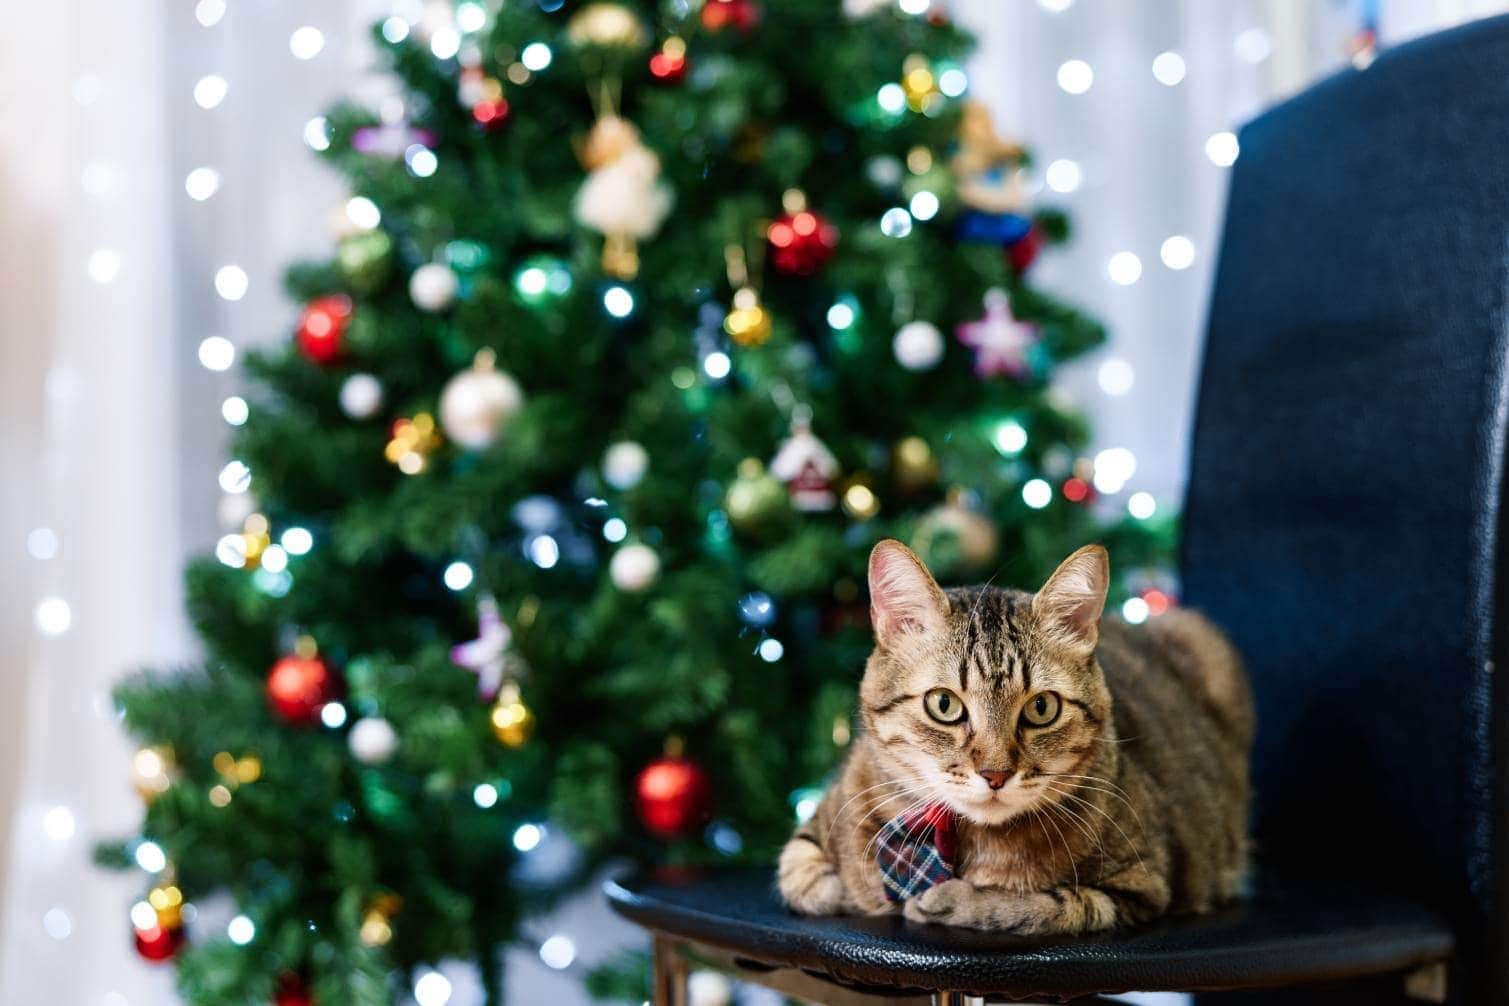 Cat with-a christmas tree in the background